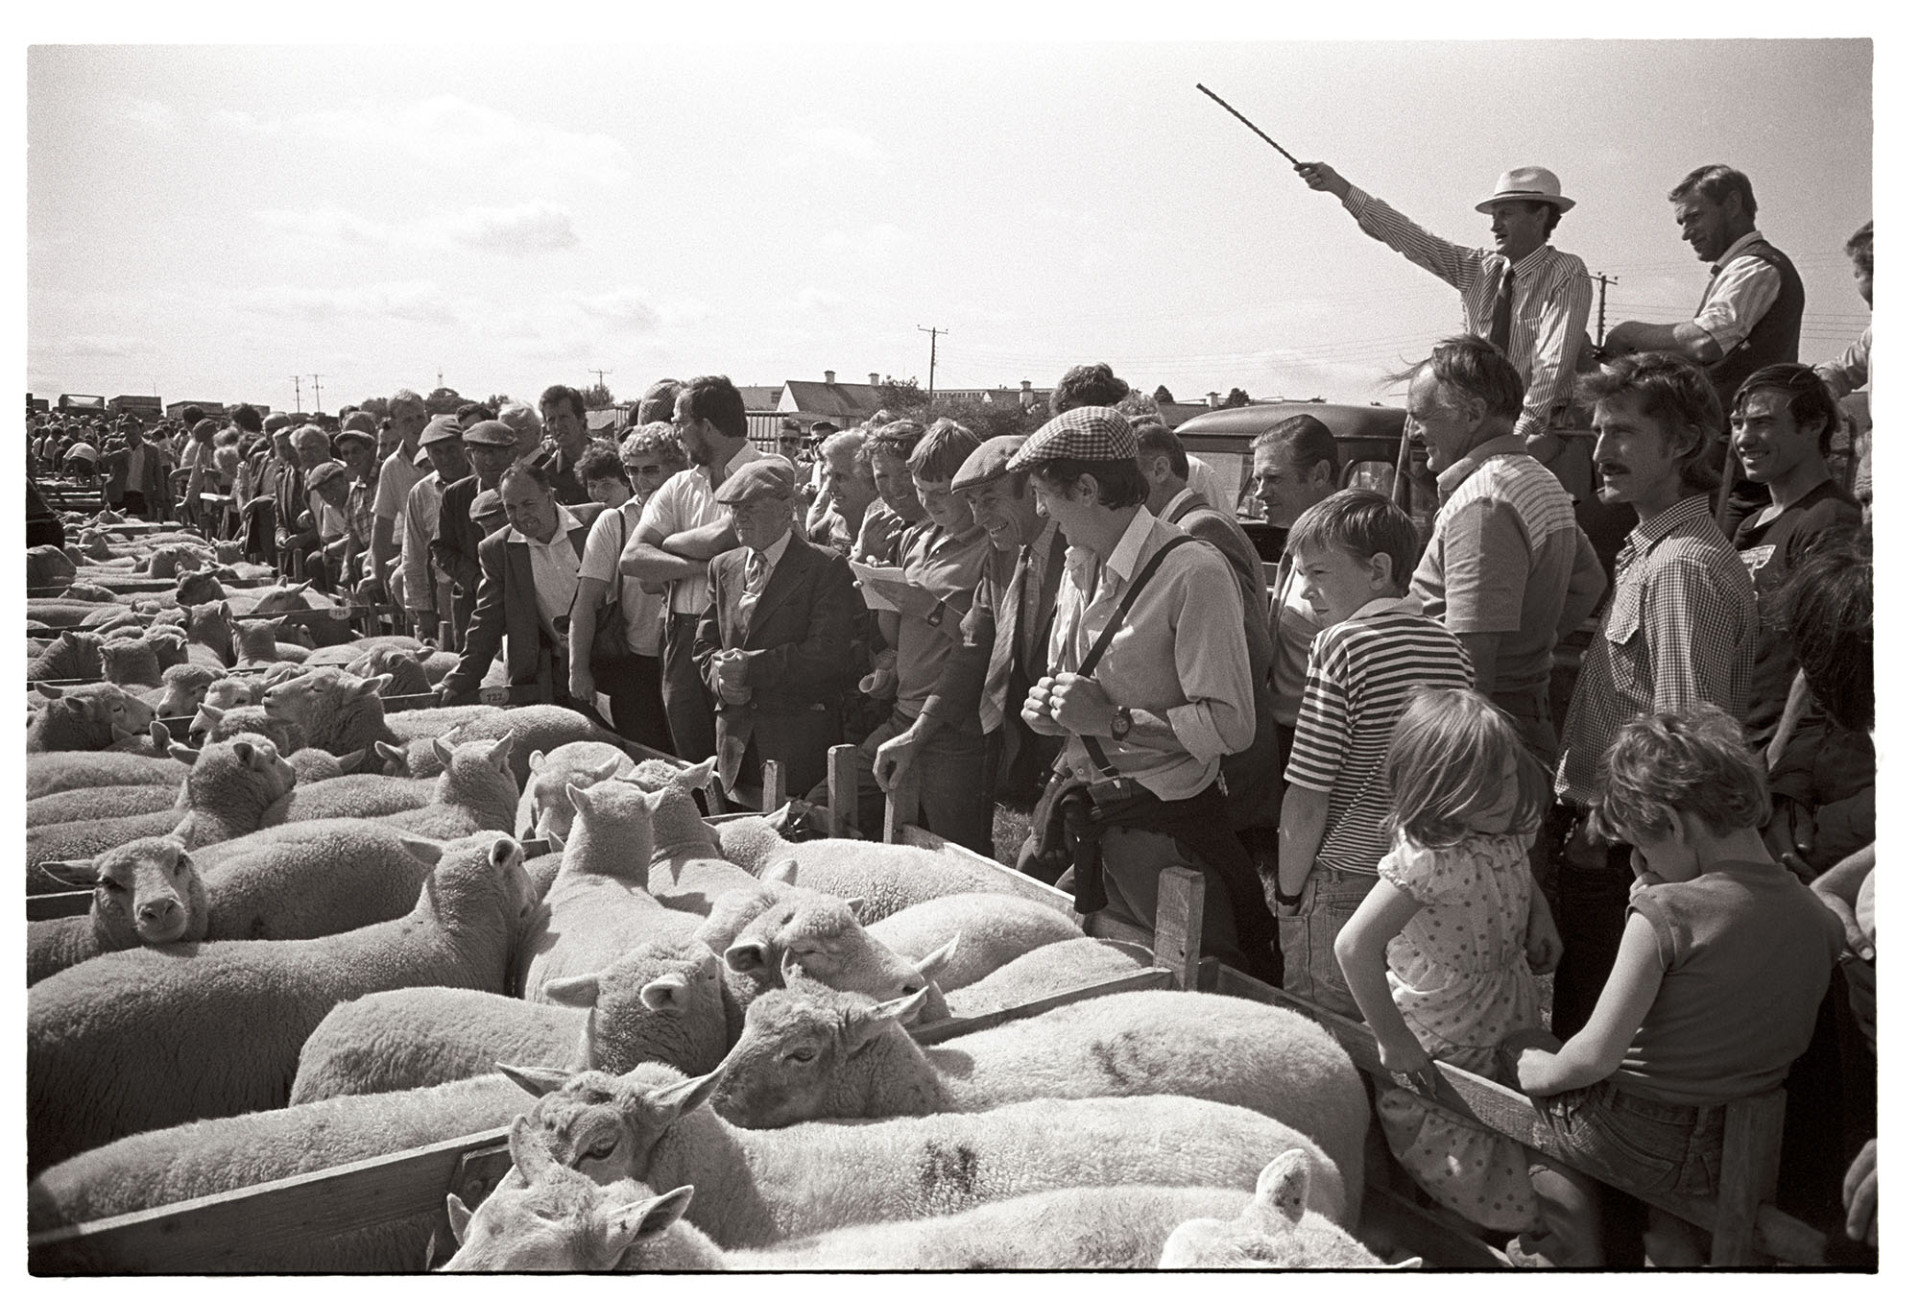 Farmer standing looking at sheep in pen. <br />
[Men, women and children looking at sheep in pens at South Molton Sheep Fair. The auctioneer is standing behind them, taking bids.]